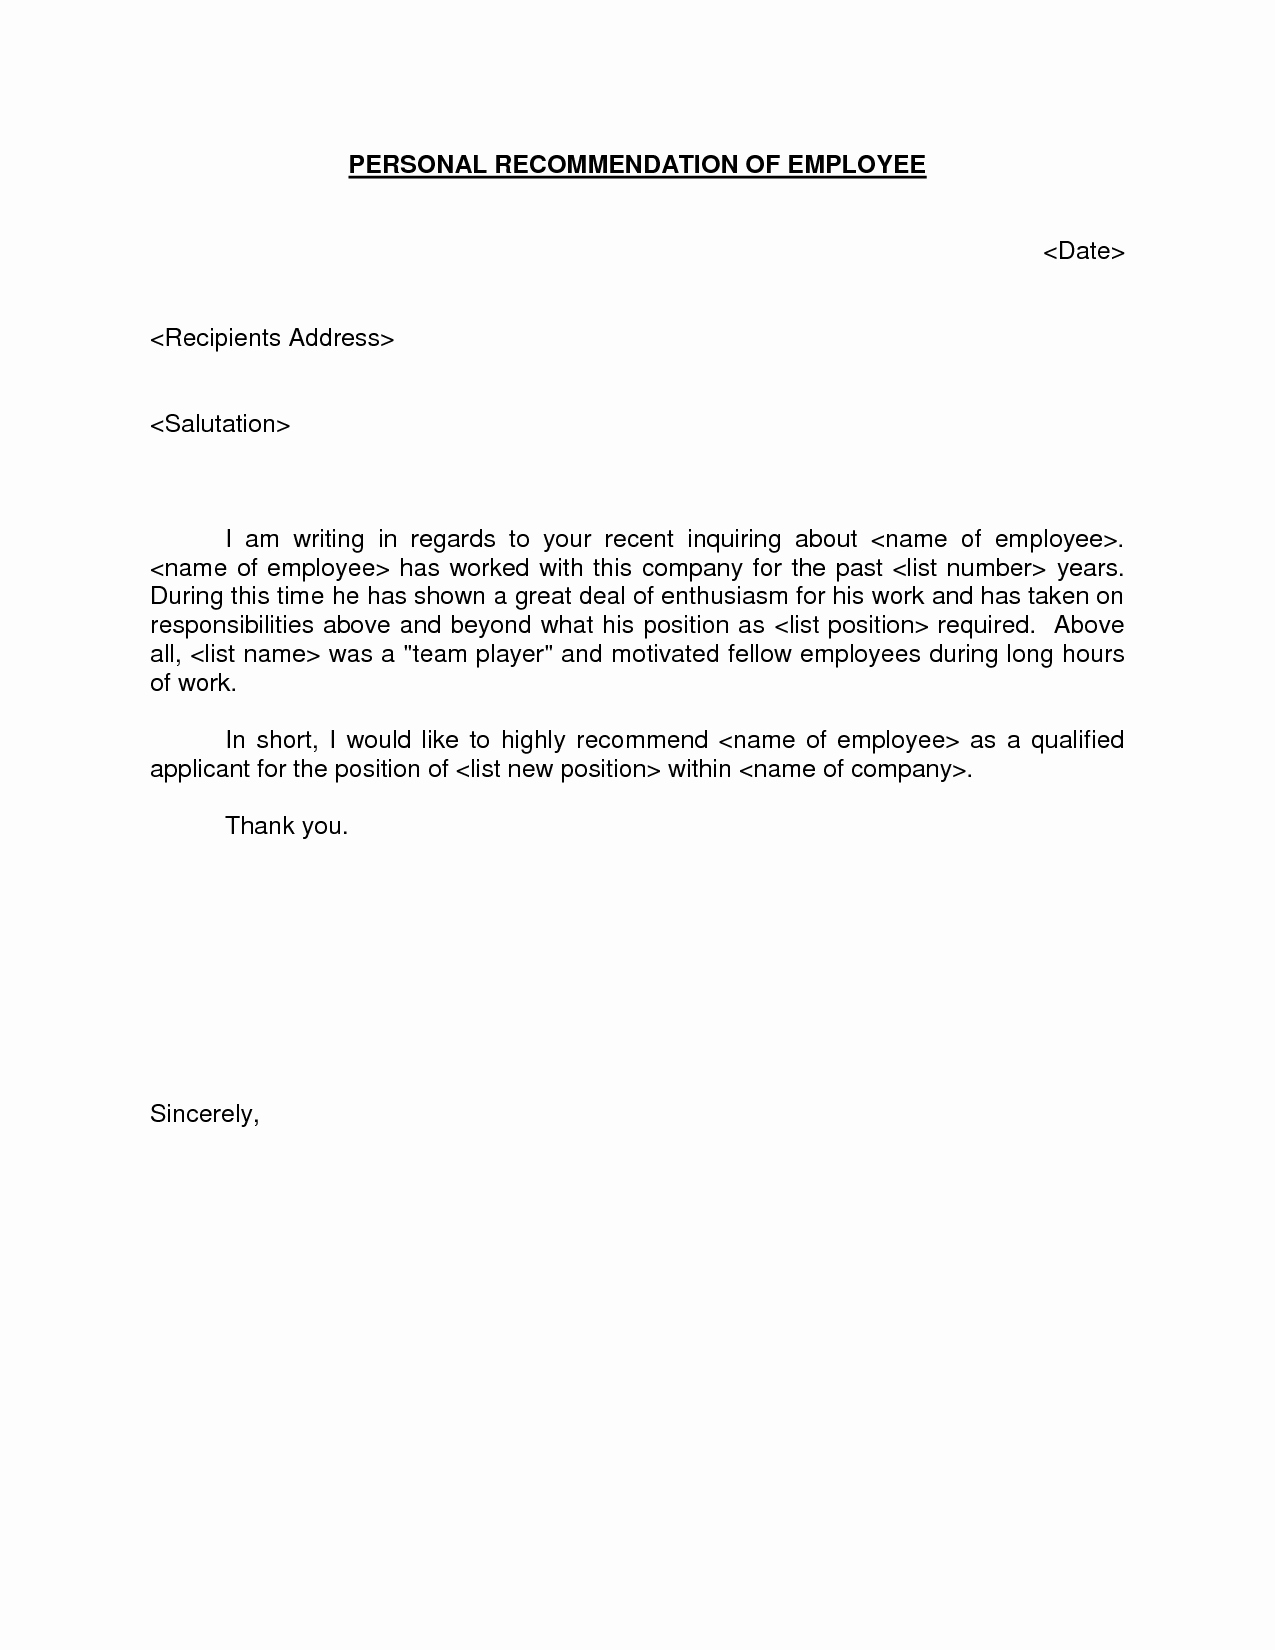 Sample Letter Of Recommendation Employee Best Of Sample Re Mendation Letter From Employee to Boss